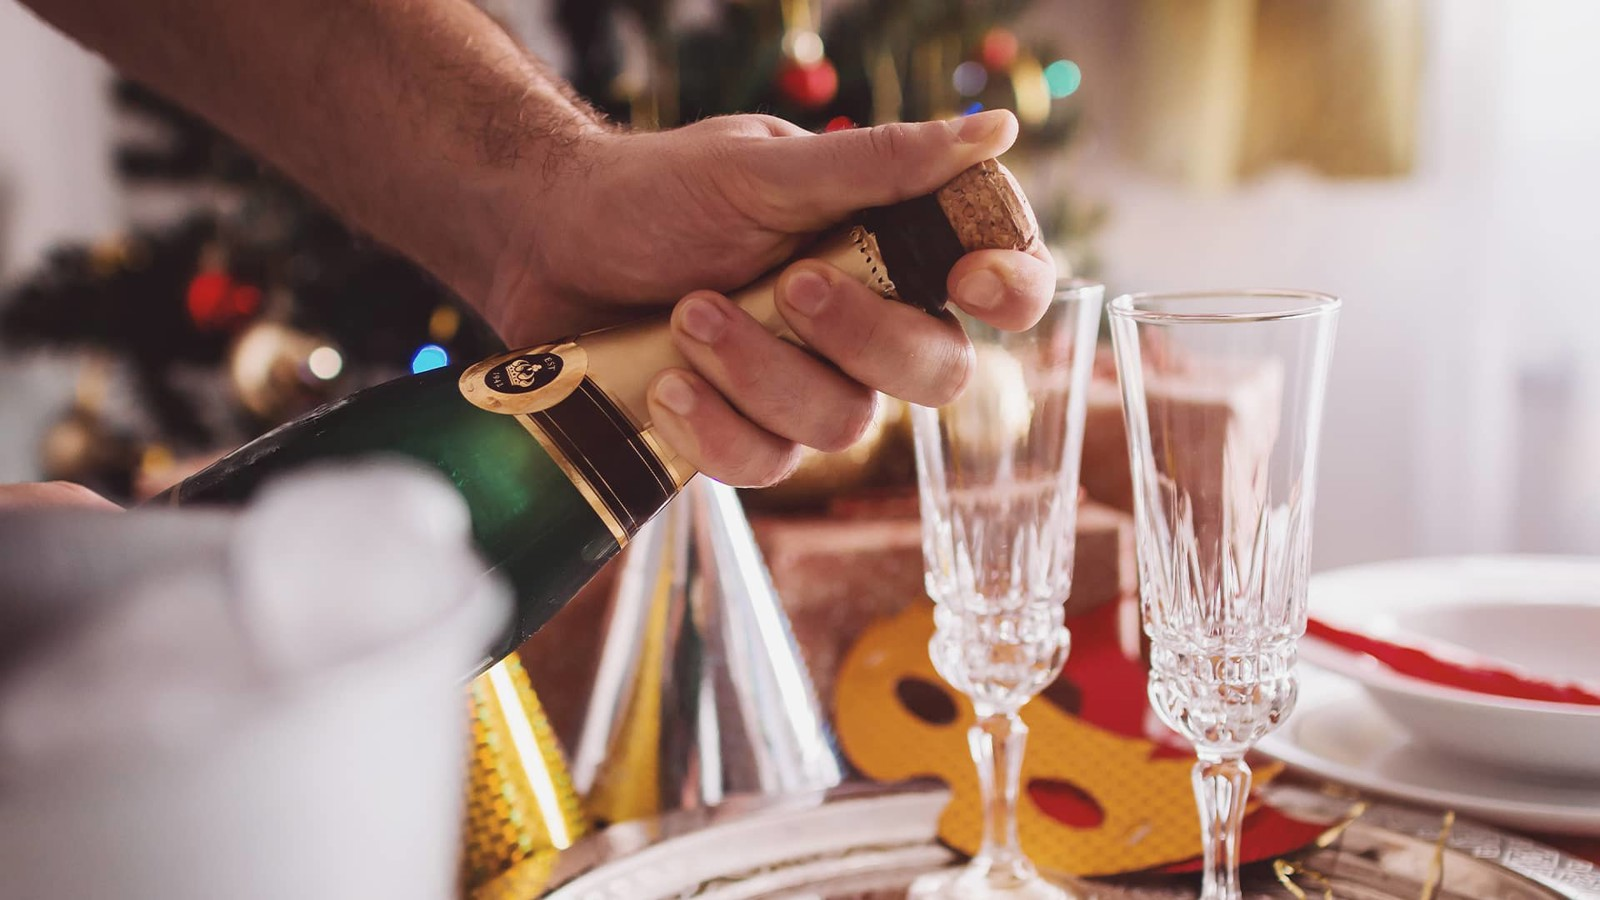 Two champagne glasses and champagne bottle with New Year's accessories in the background